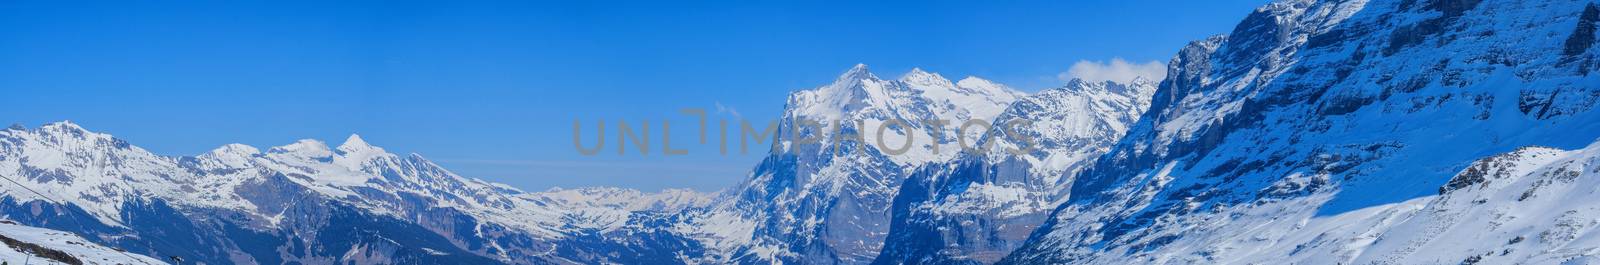 Panoramic view of the Alps mountains in Switzerland.